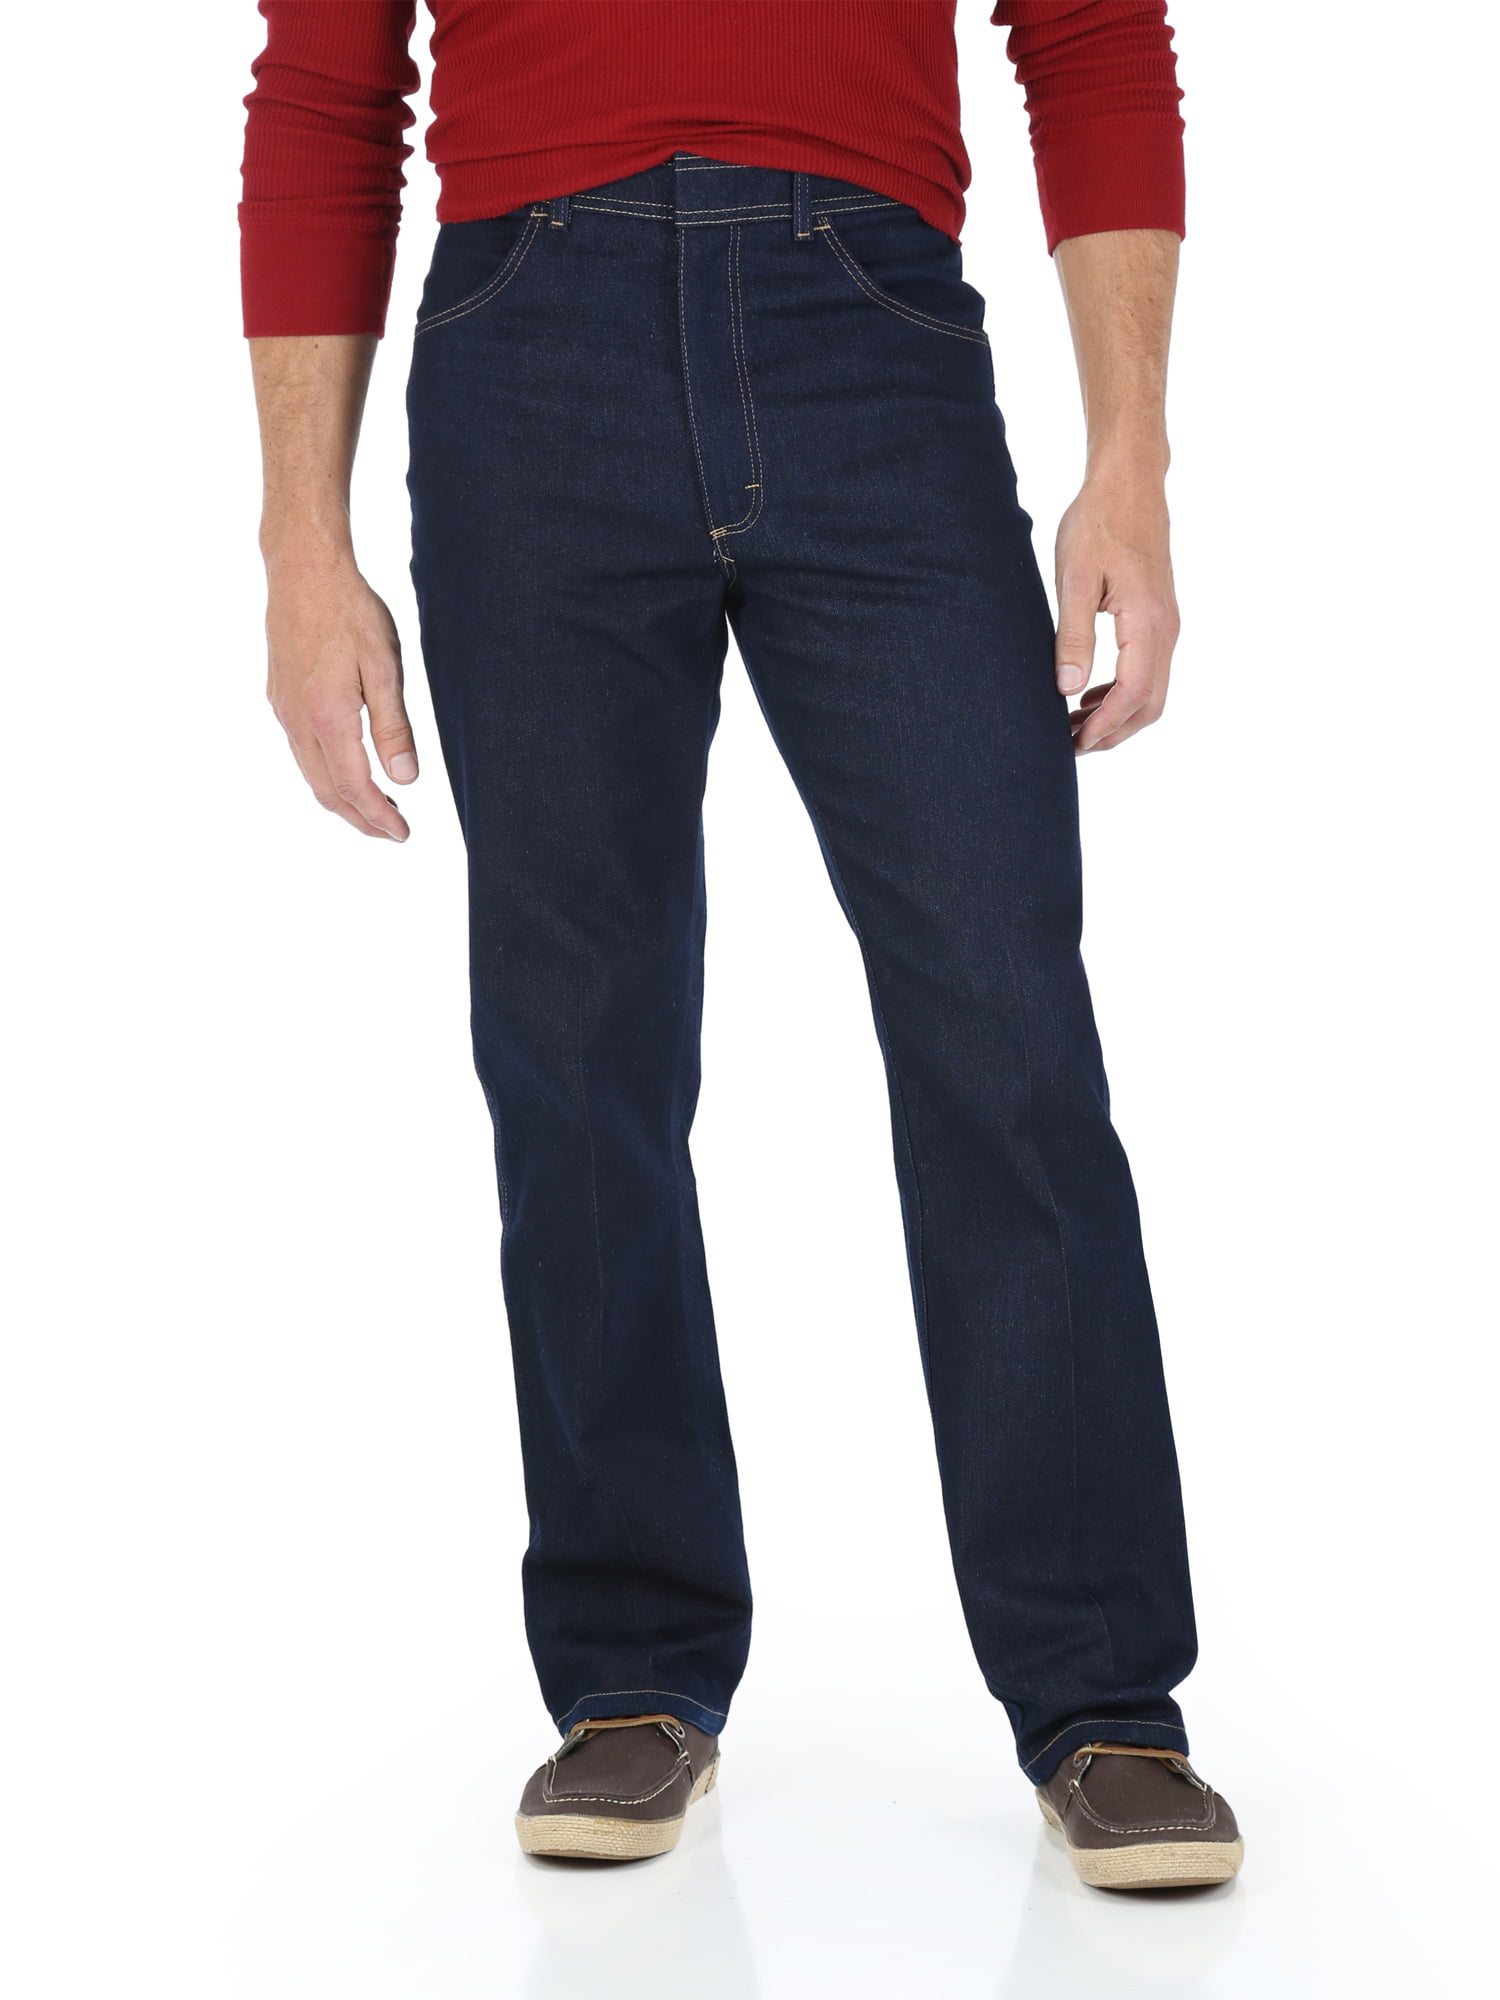 Wrangler greensboro jeans in big and tall